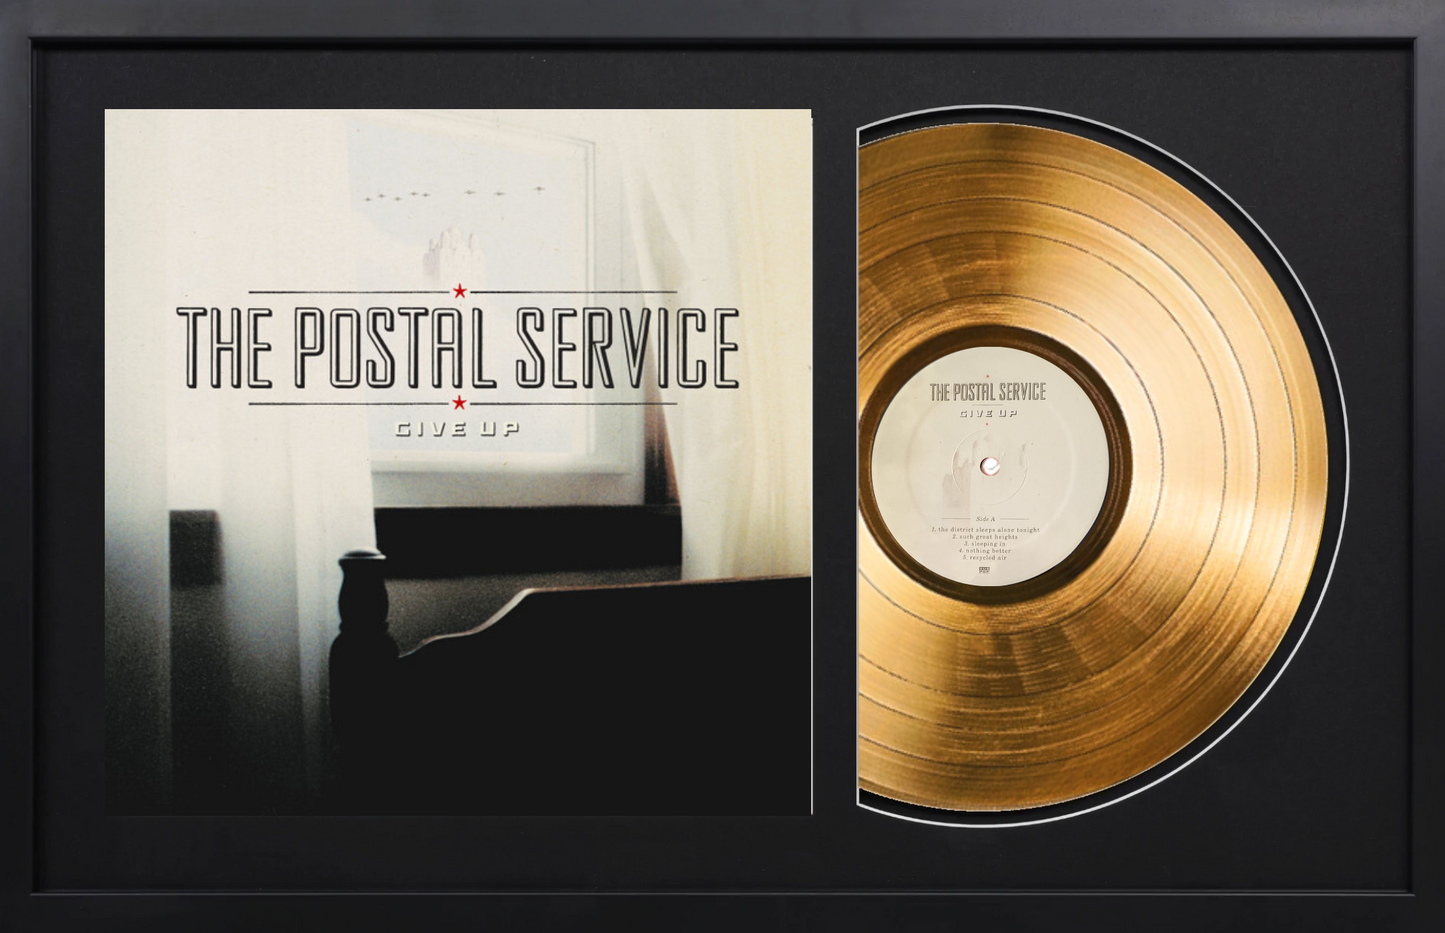 The Postal Service - Give Up - Limited Edition, 14K Gold Album